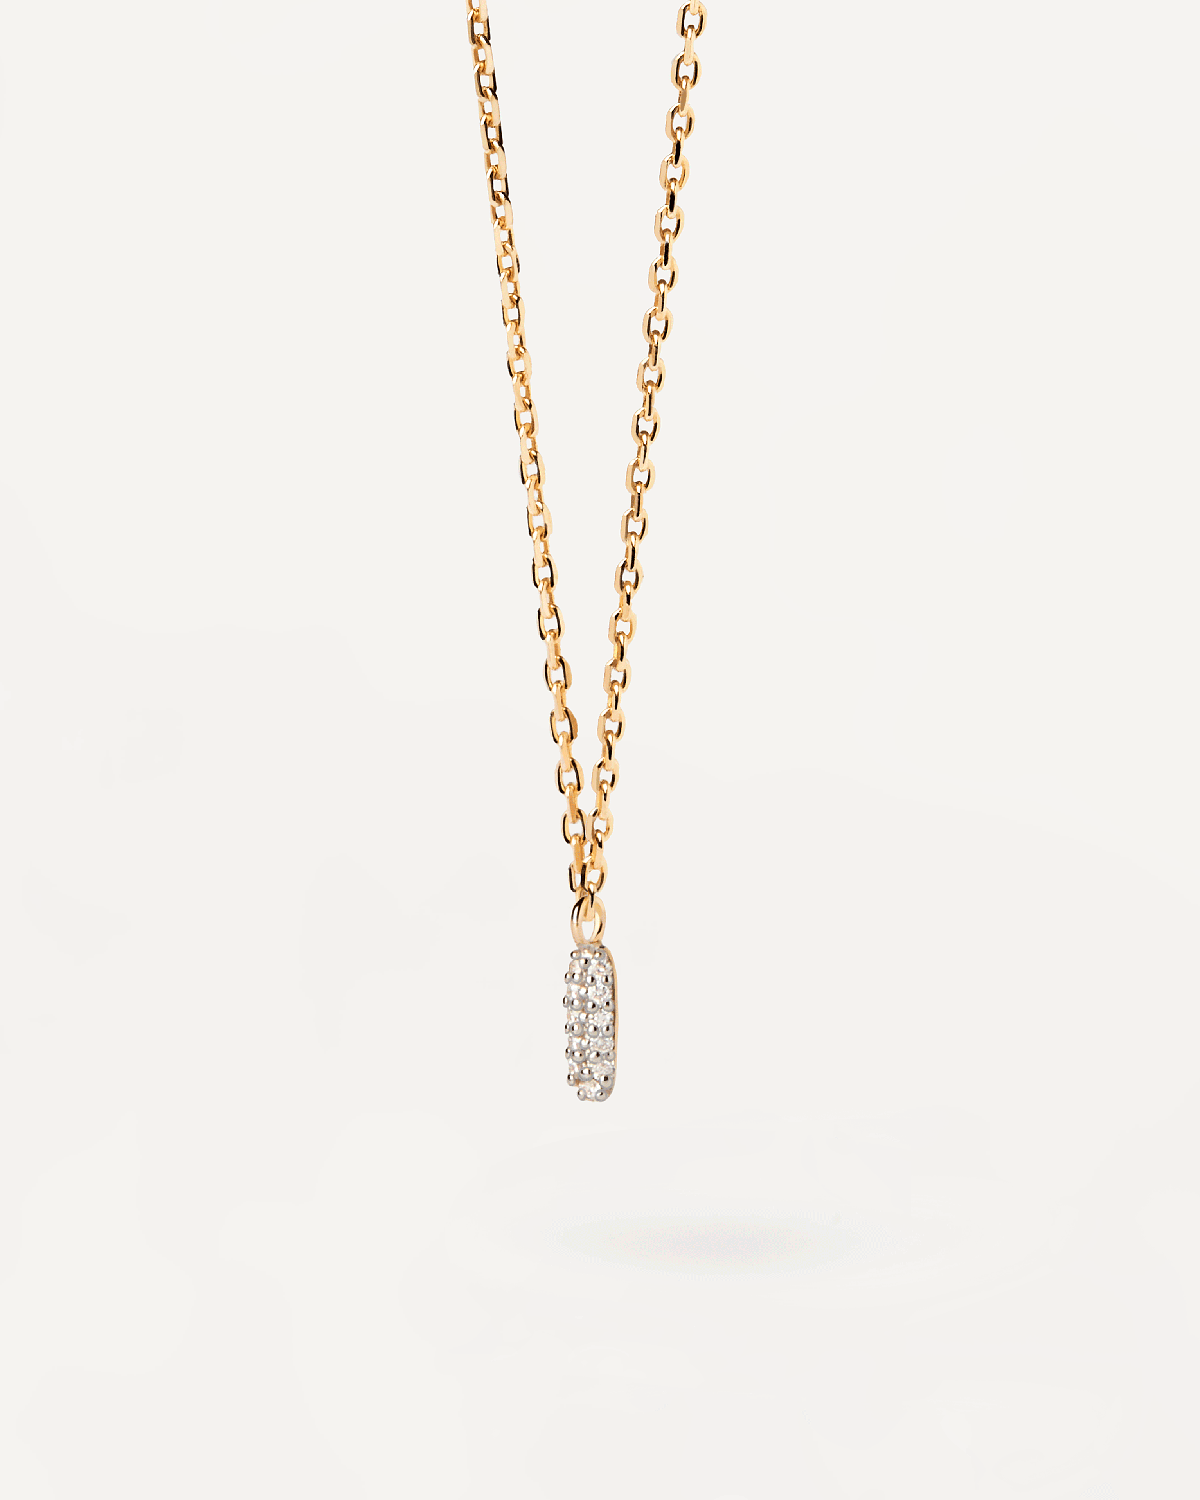 Diamonds and gold Pop necklace. Solid yellow gold chain necklace with oval shape pavé lab-grown diamonds of 0.04 carats . Get the latest arrival from PDPAOLA. Place your order safely and get this Best Seller.